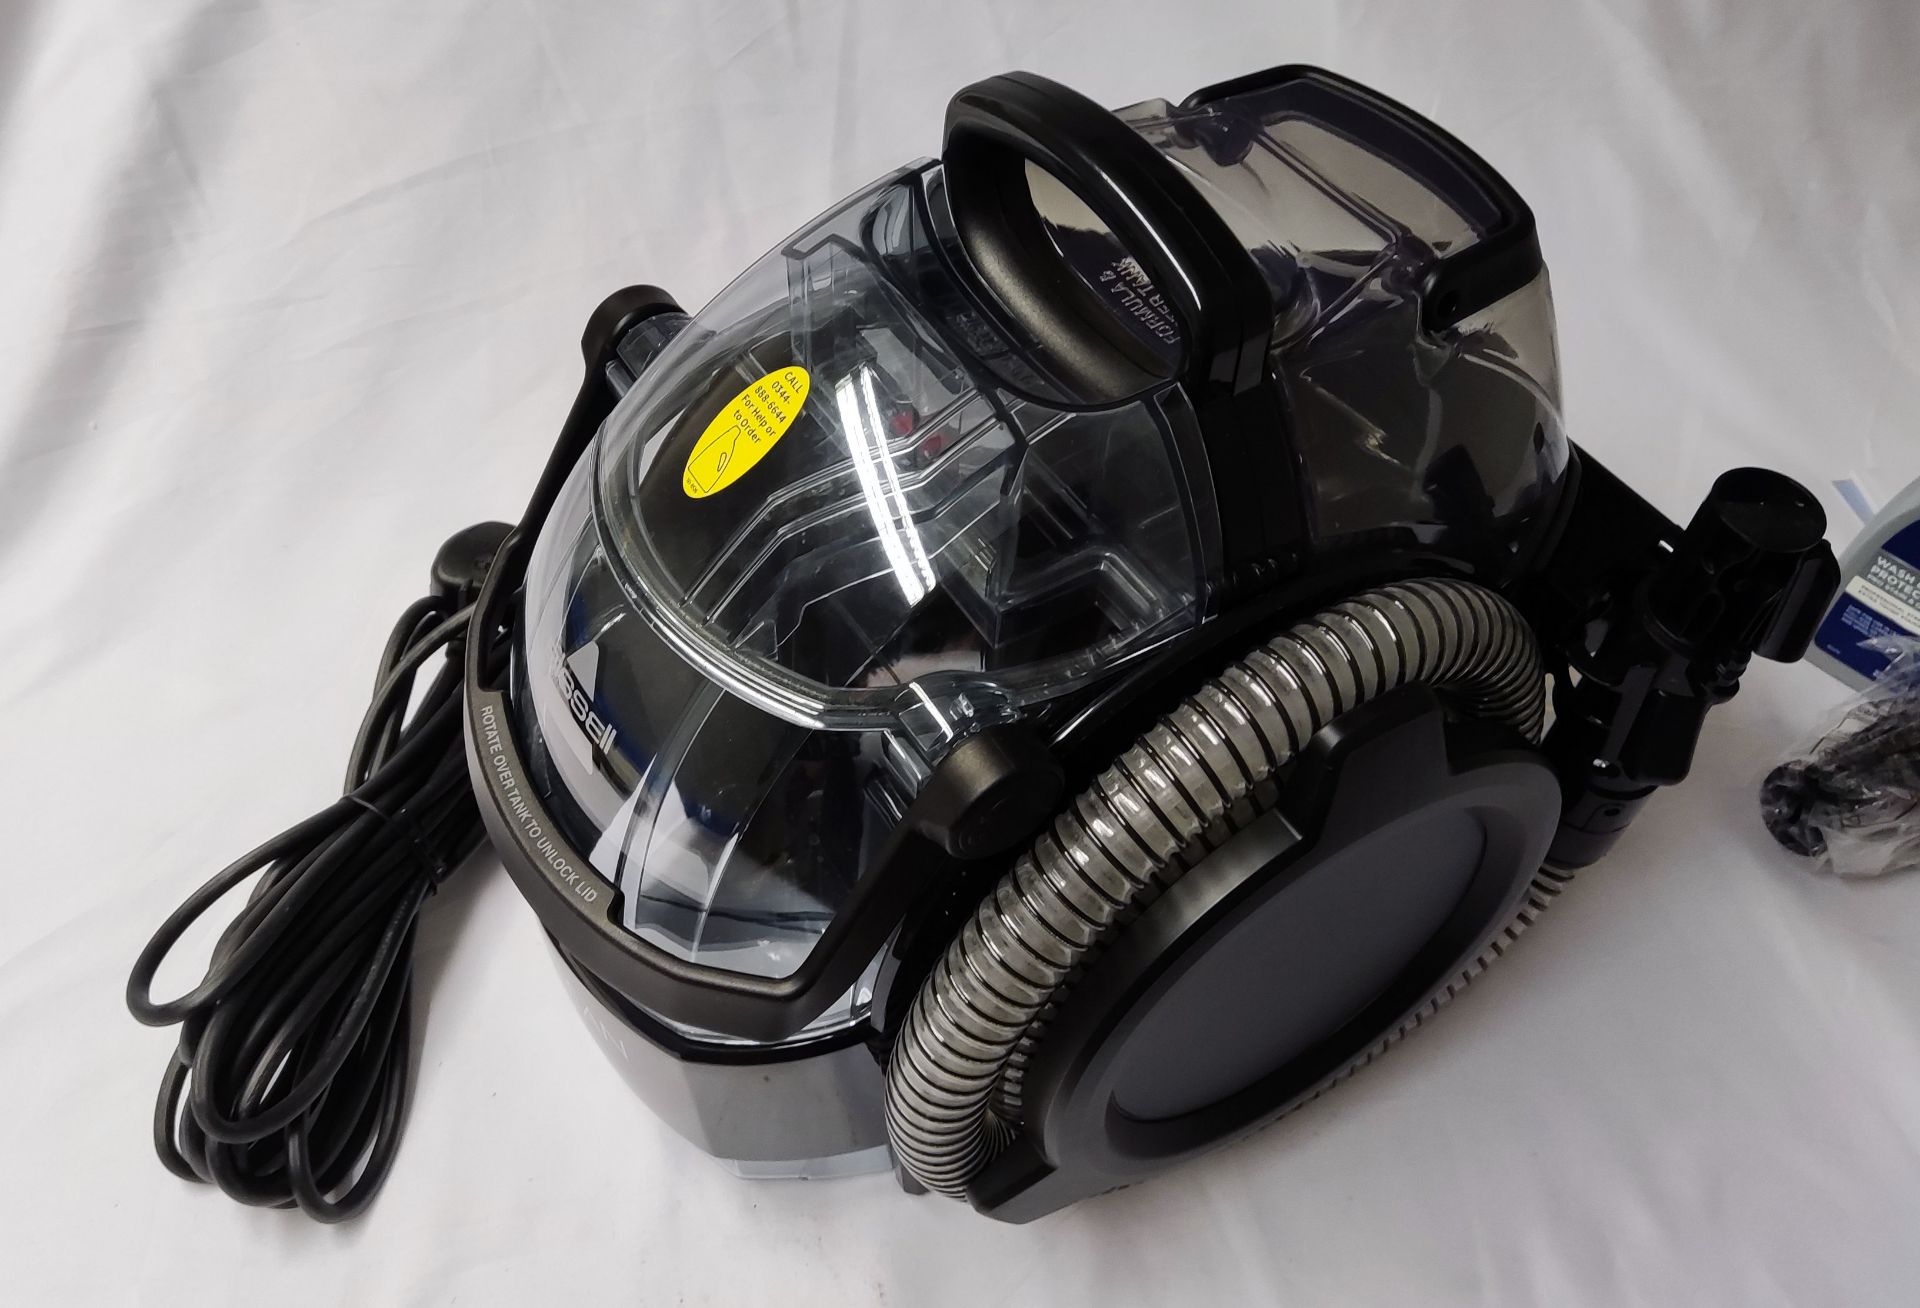 1 x BISSELL Spotclean Pro Portable Carpet & Upholstery Washer - New/Boxed - RRP £179.99 - Ref: - Image 6 of 15